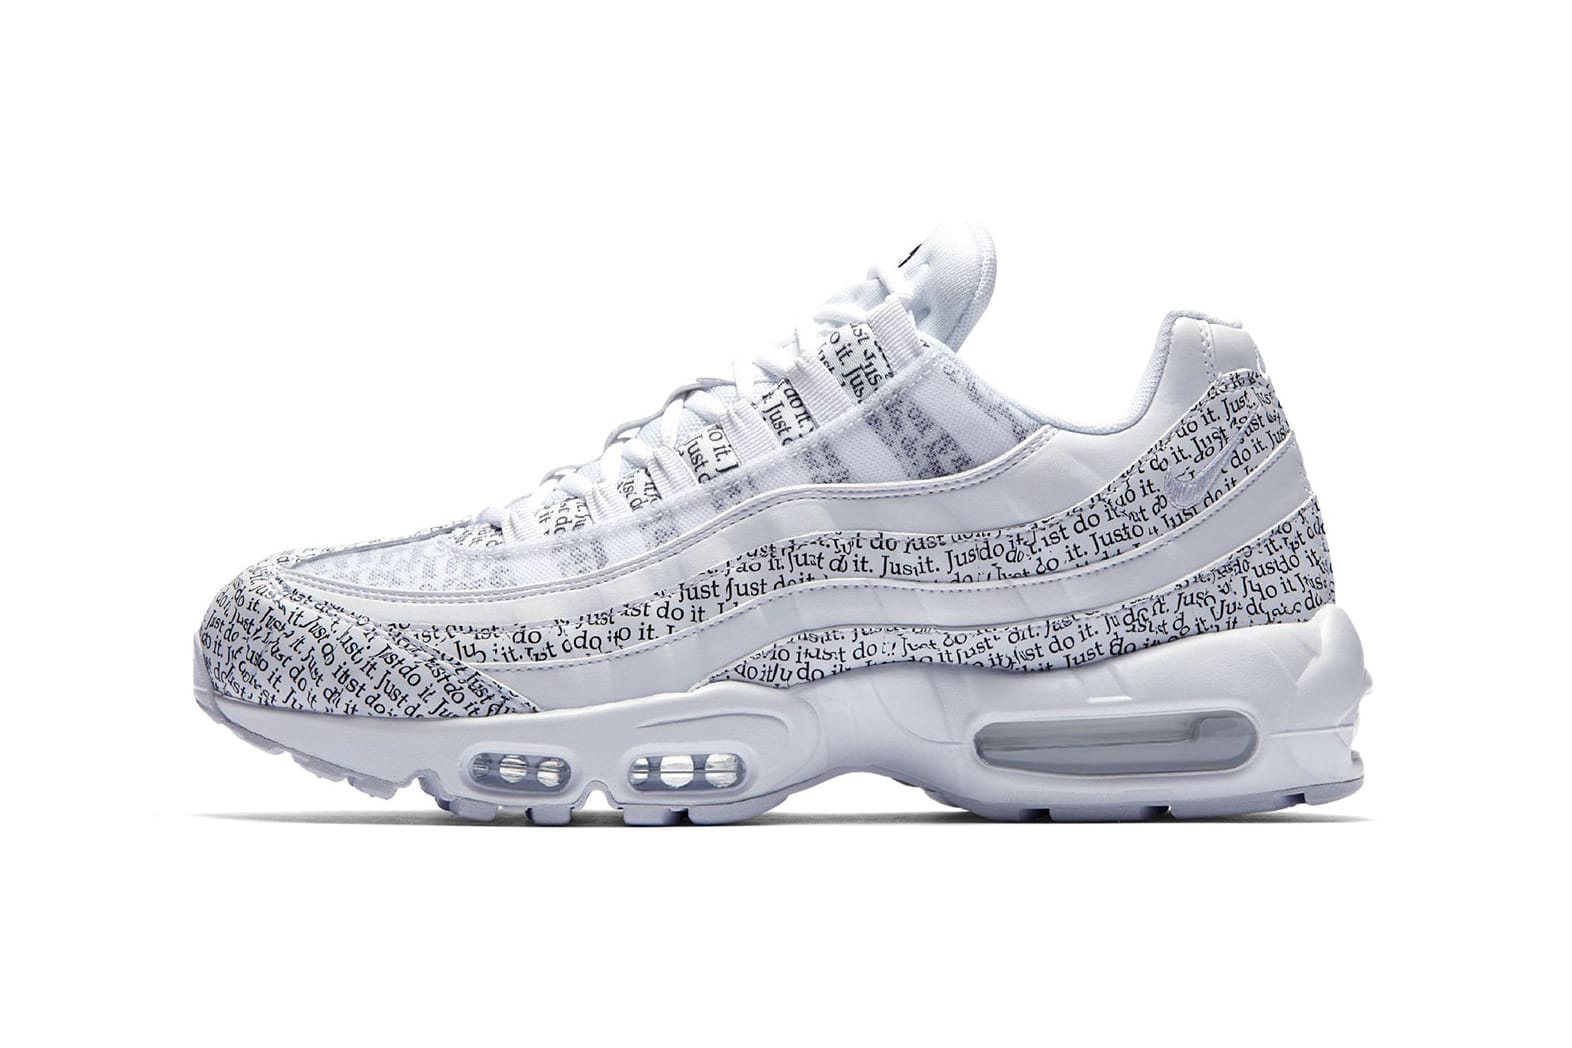 Nike Teases Air Max 95 With Just Do It 